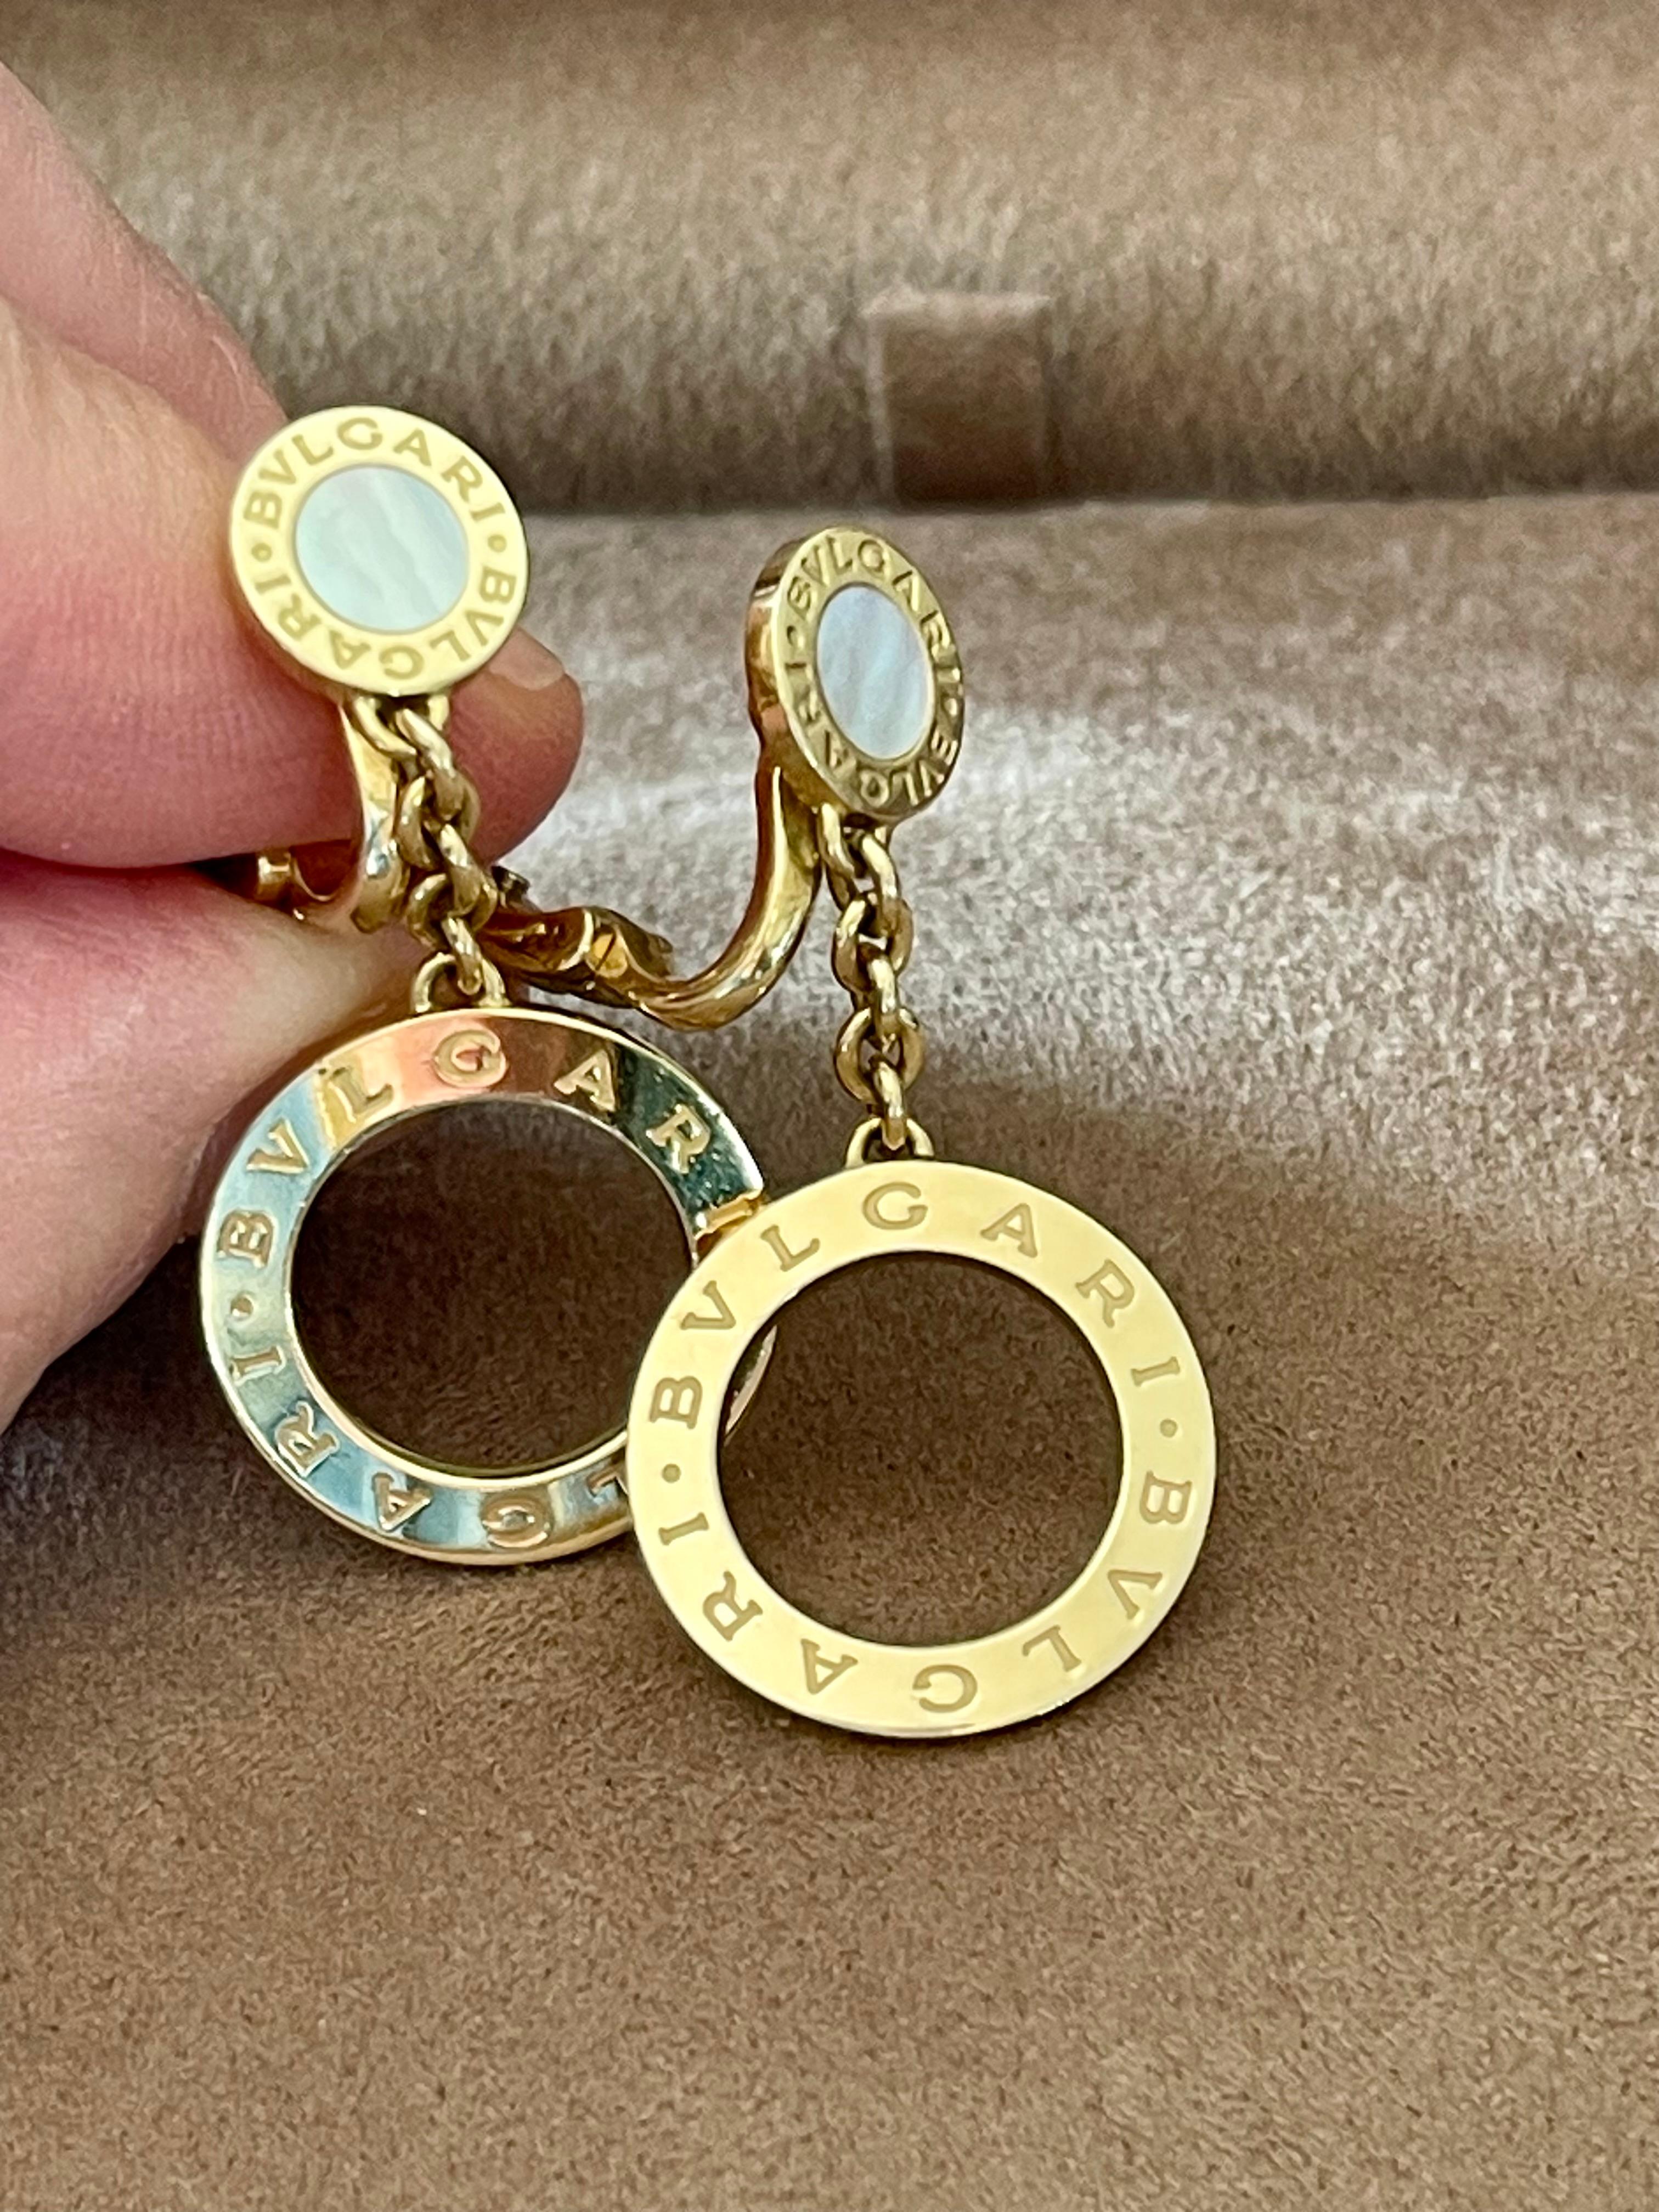 These are authentic BULGARI 18 K Yellow Gold Mother Of Pearl BVLGARI BVLGARI Drop Earrings. These stylish clip on earrings feature a mother of pearl encircled by the BVLGARI name logo on a flat disk of 18 Karat yellow Gold with a an cutout disk